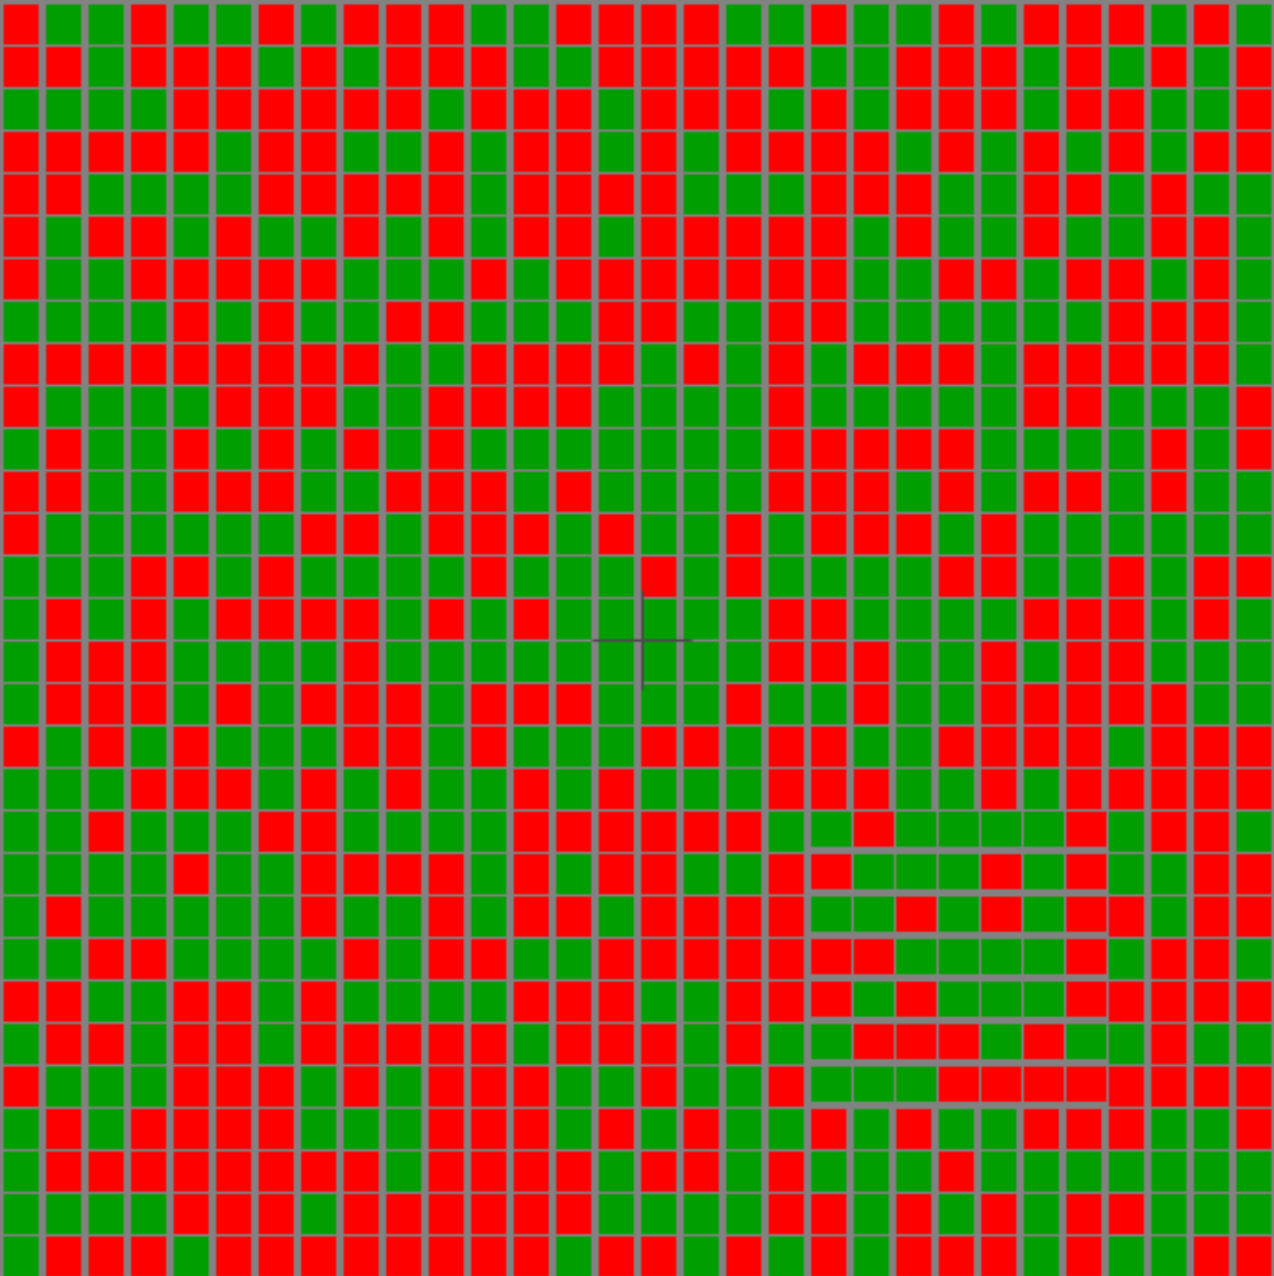 Illustration of the camouflage stimulus.  Like the last stimulus but randomly som eof the elements are in red.